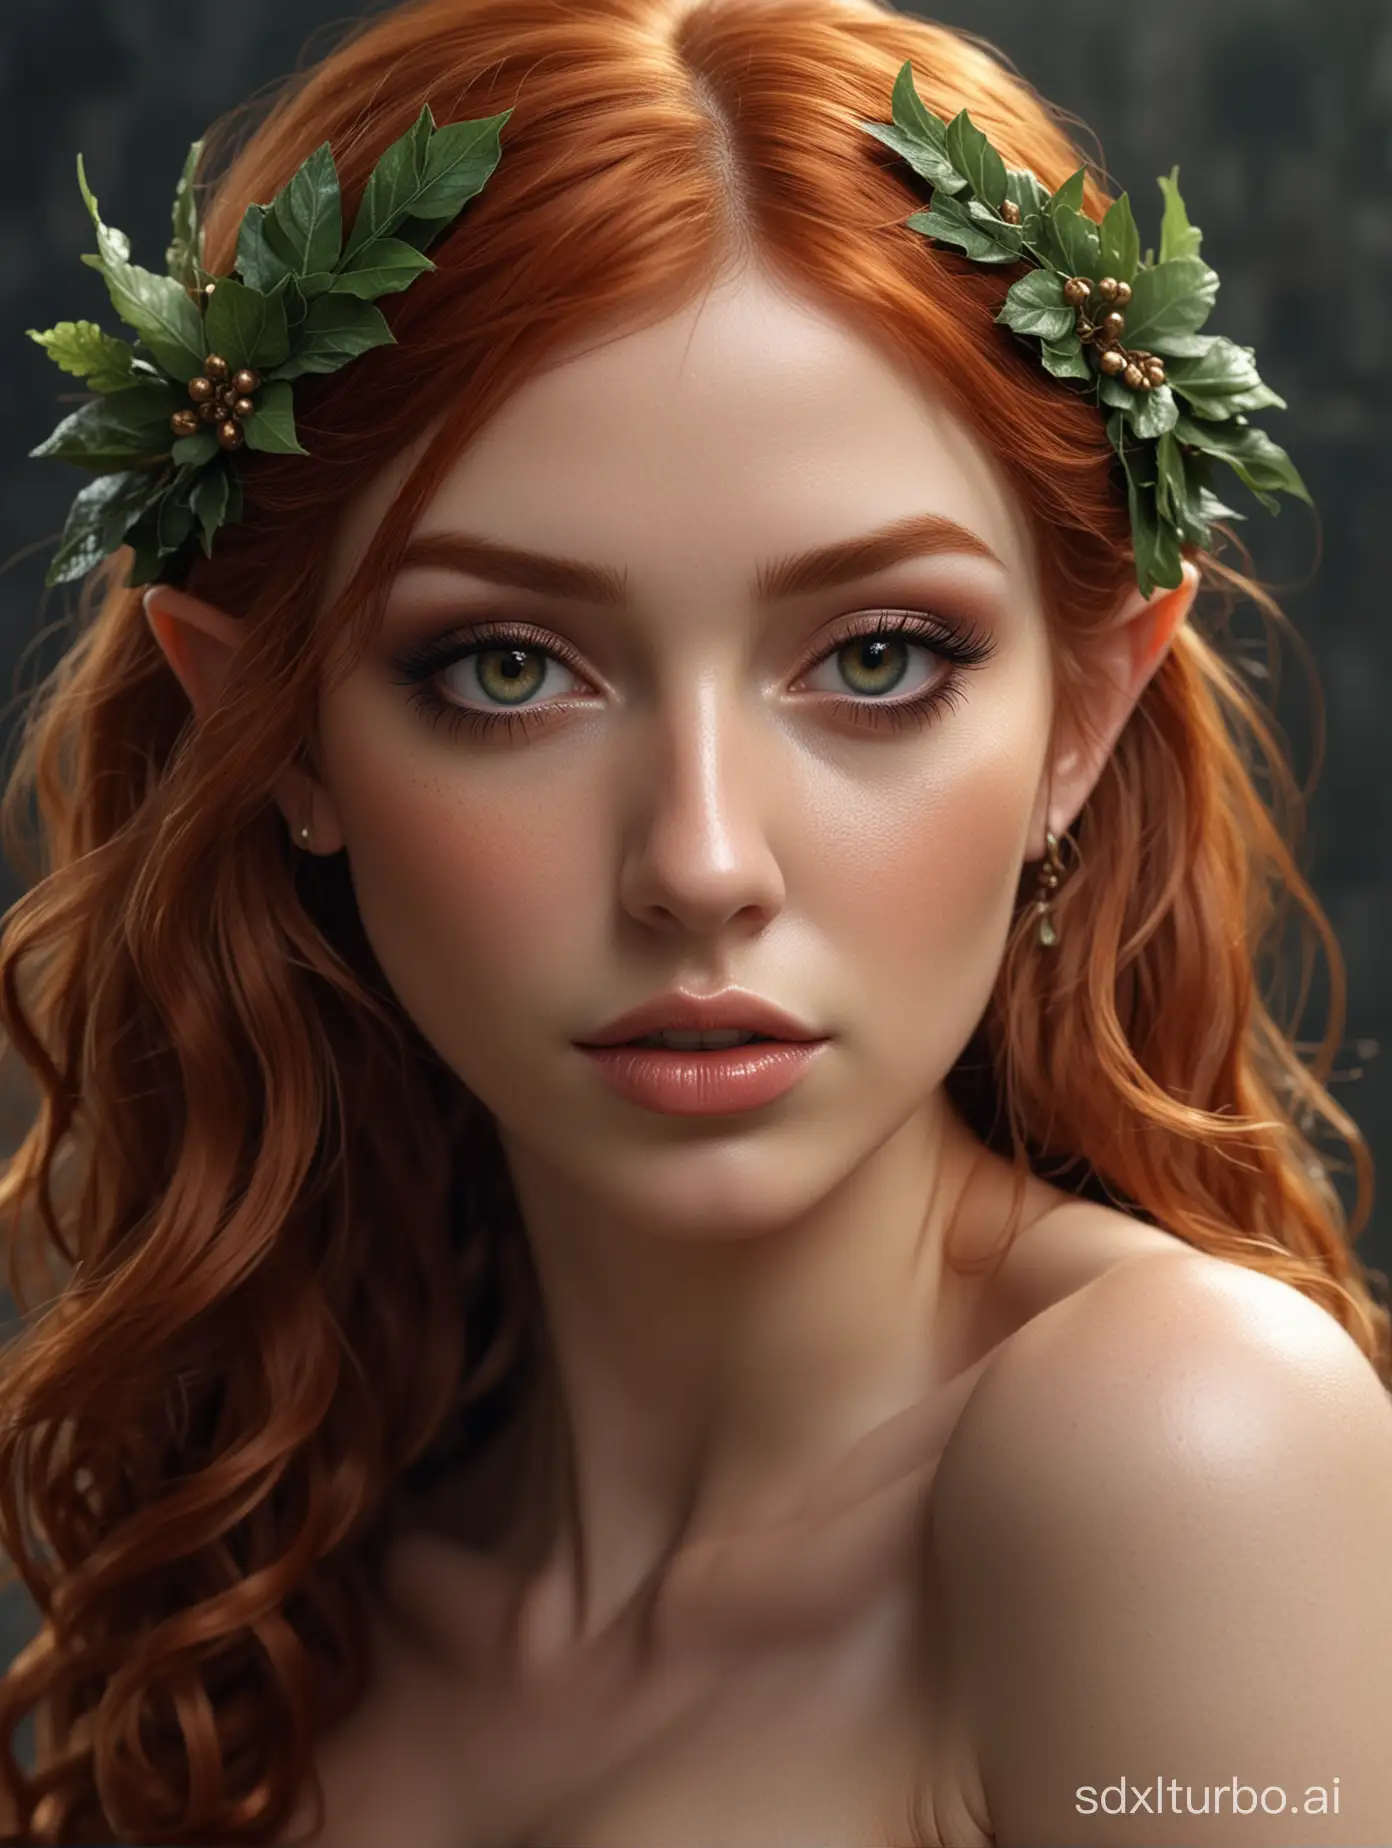 Alluring-Ginger-Haired-Elf-with-Delicate-Makeup-and-Intricate-Details